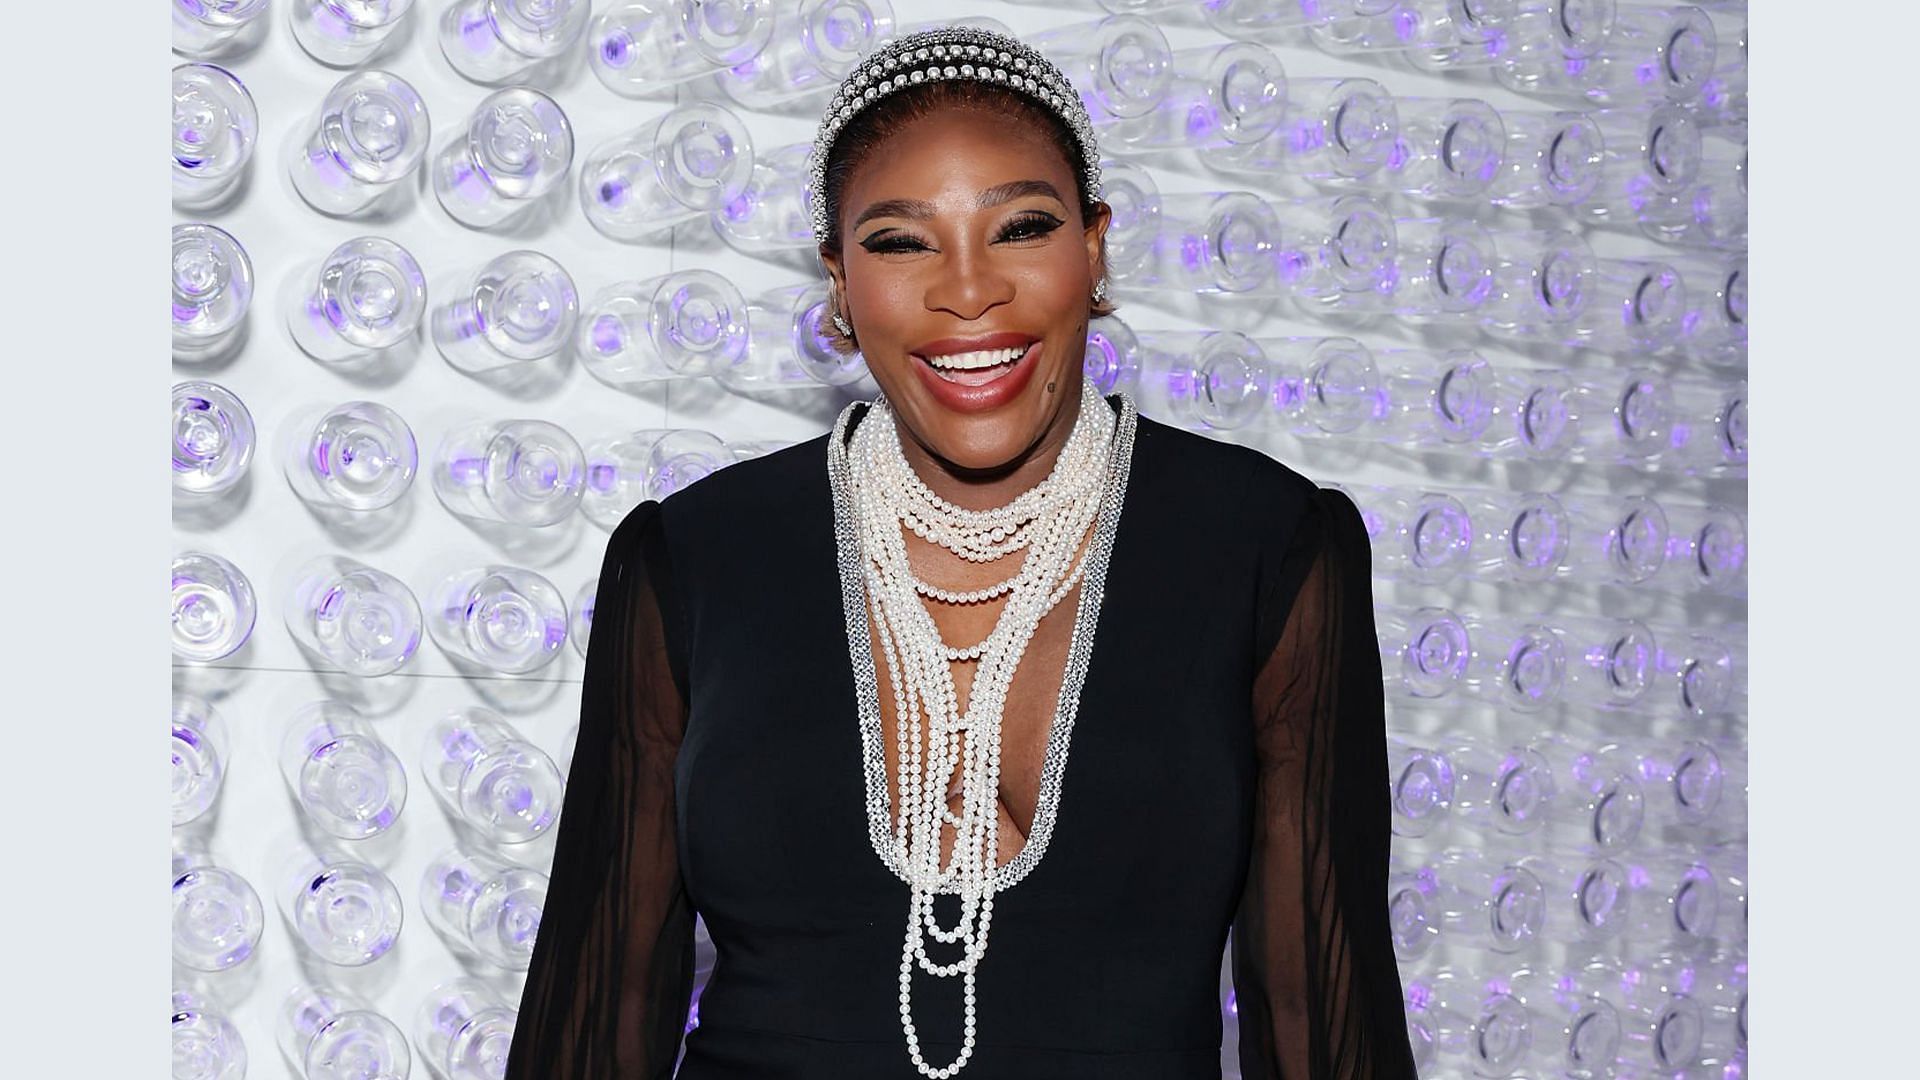 Serena Williams is set to launch her new cosmetic brand later this month.